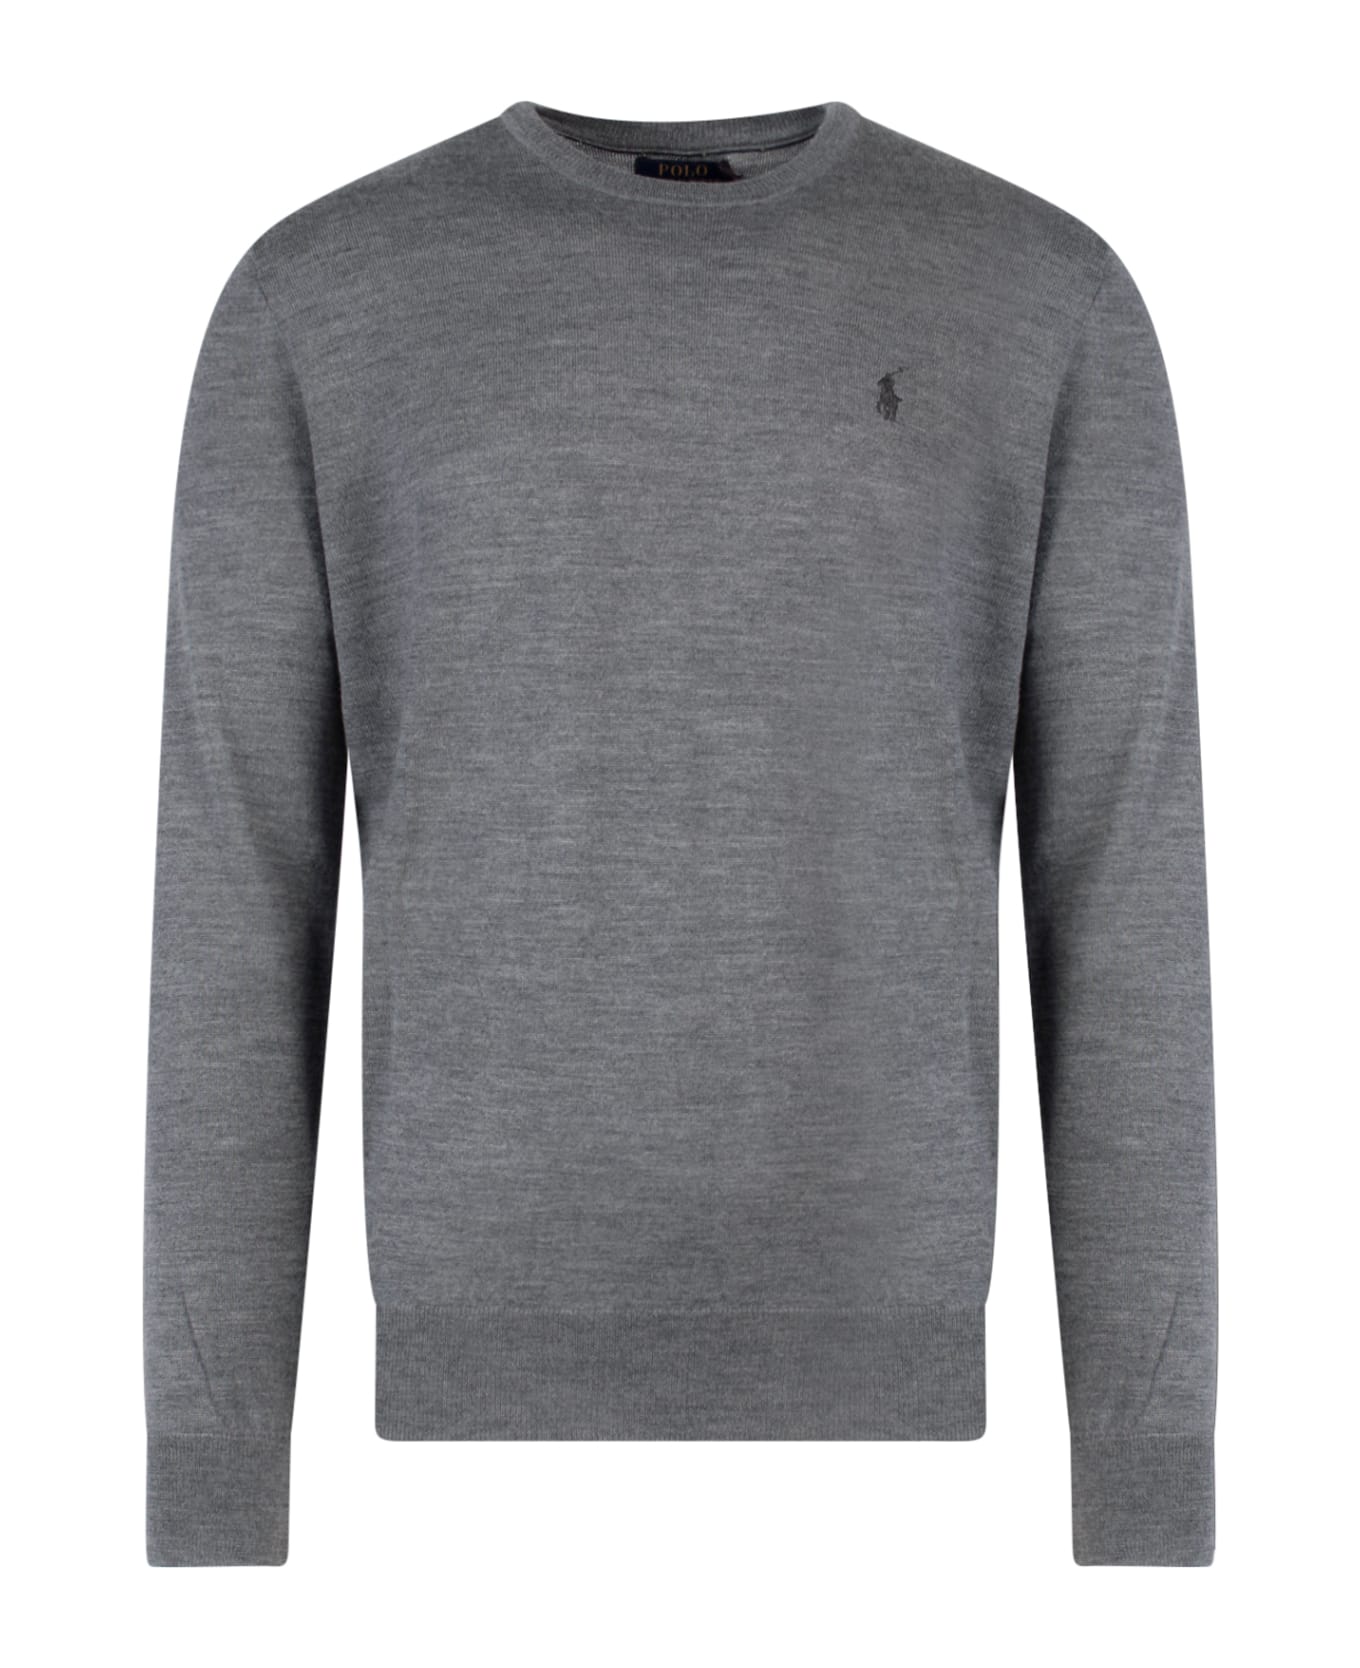 Polo Ralph Lauren Pony Embroidered Knit Jumper - Grey